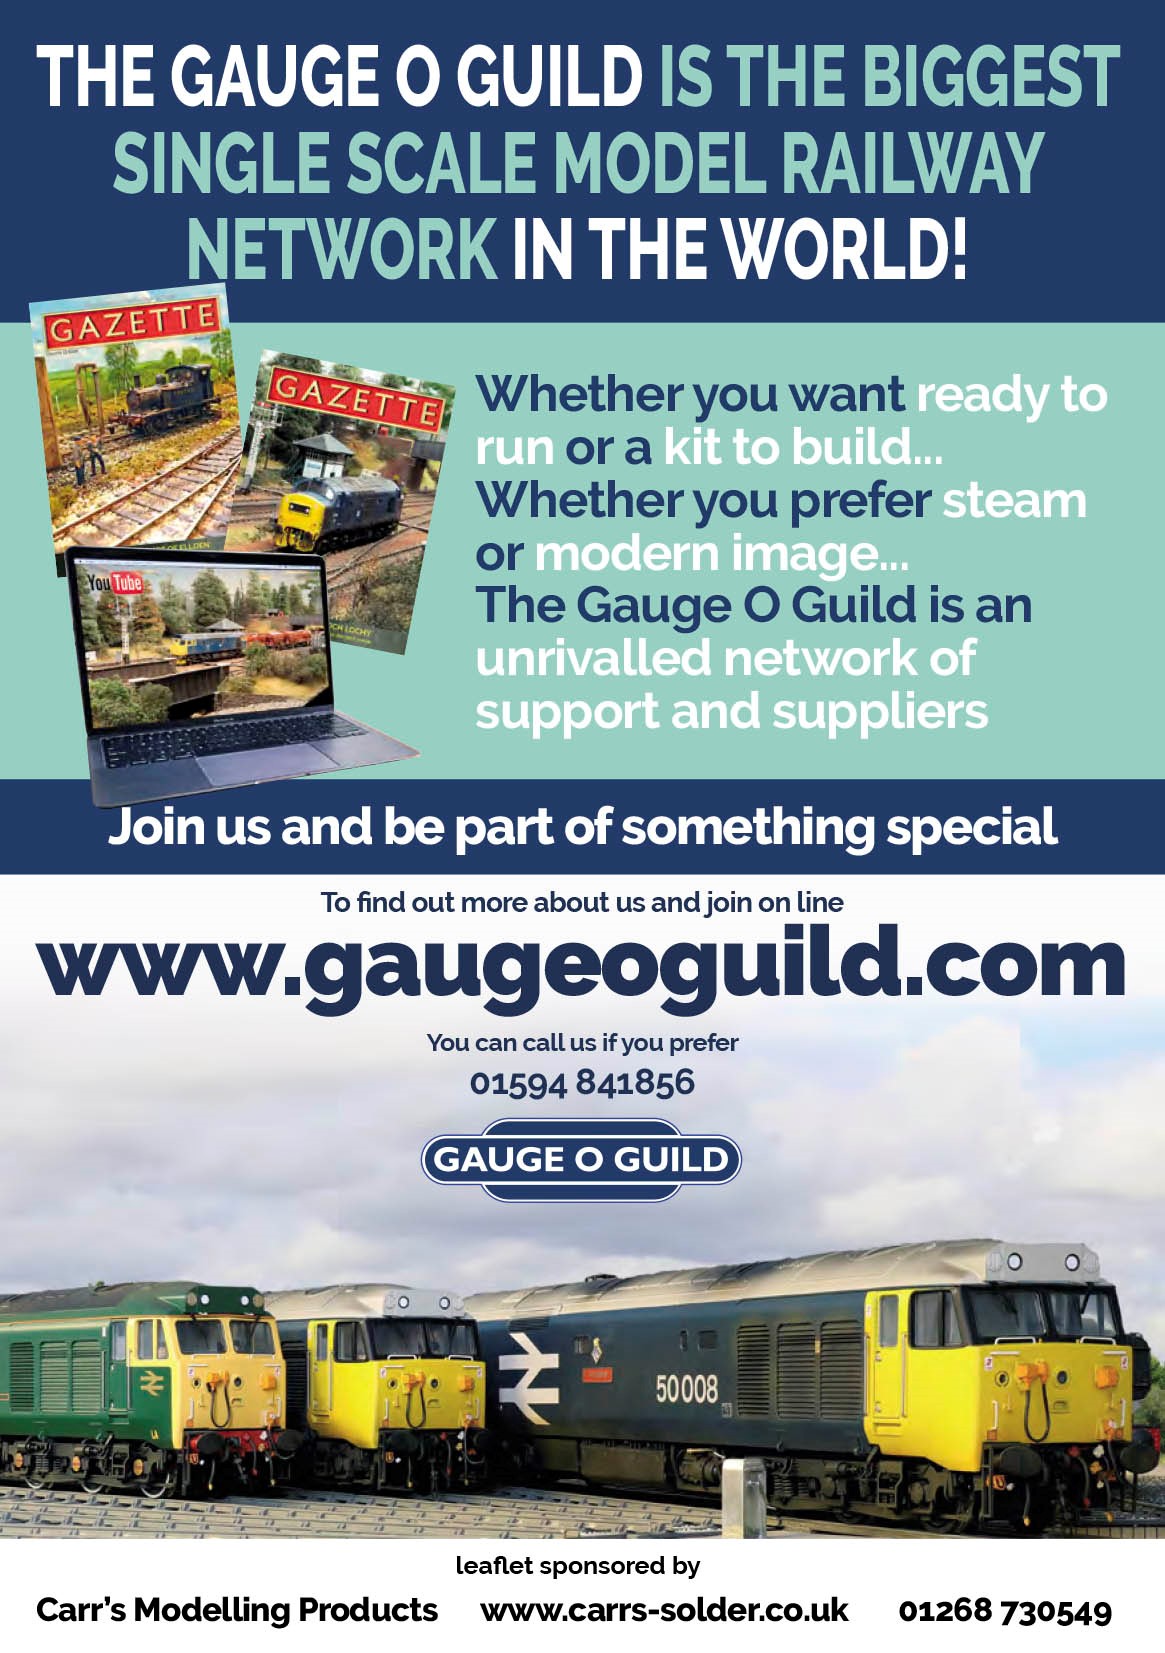 Poster for the Gauge O Guild